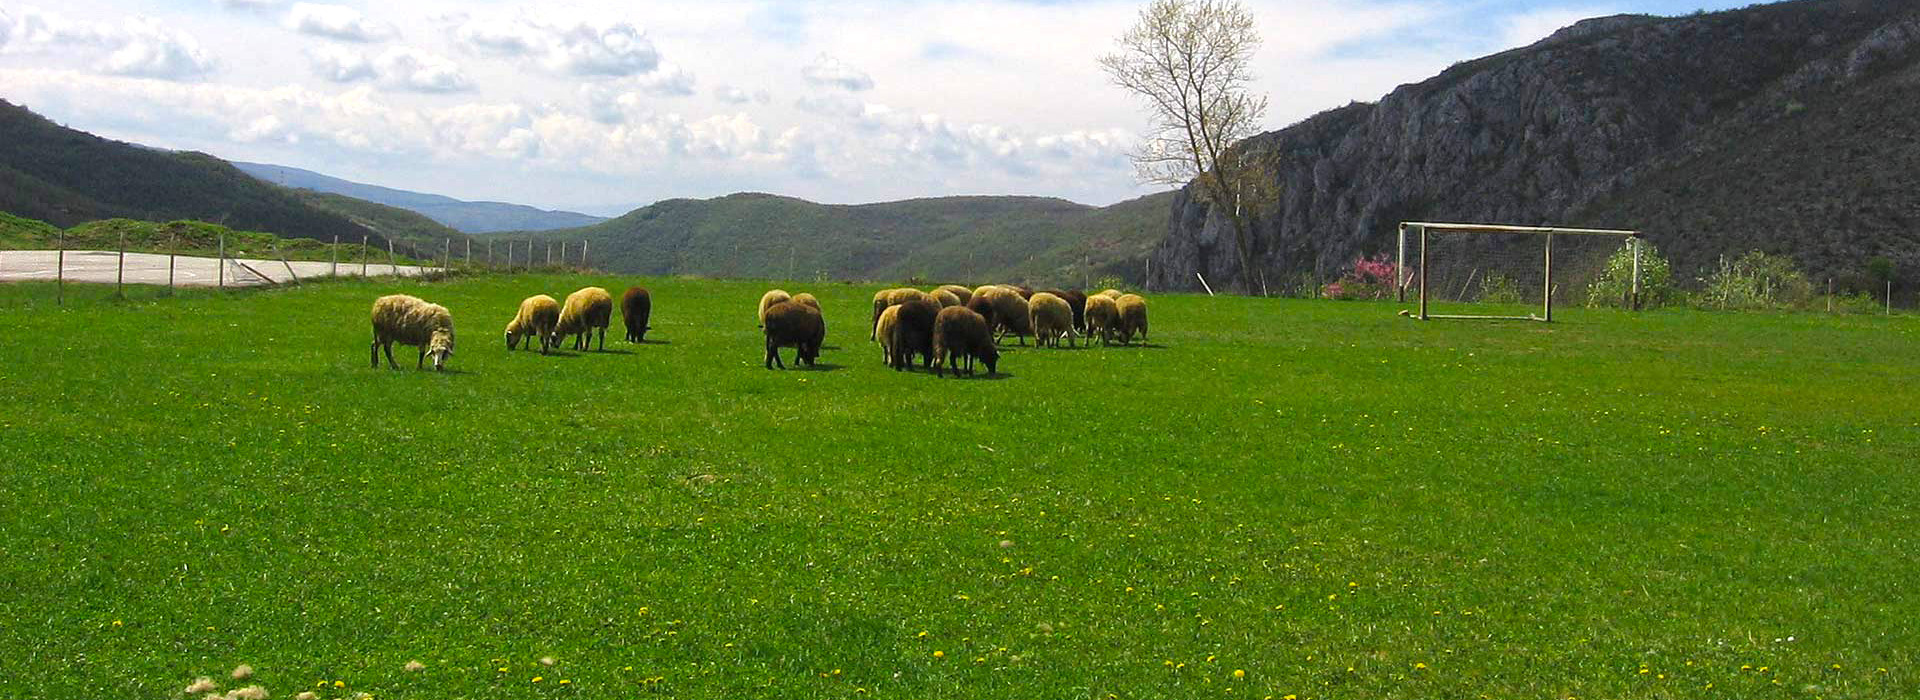 Walking Serbia guided holiday - Sheep on grazing